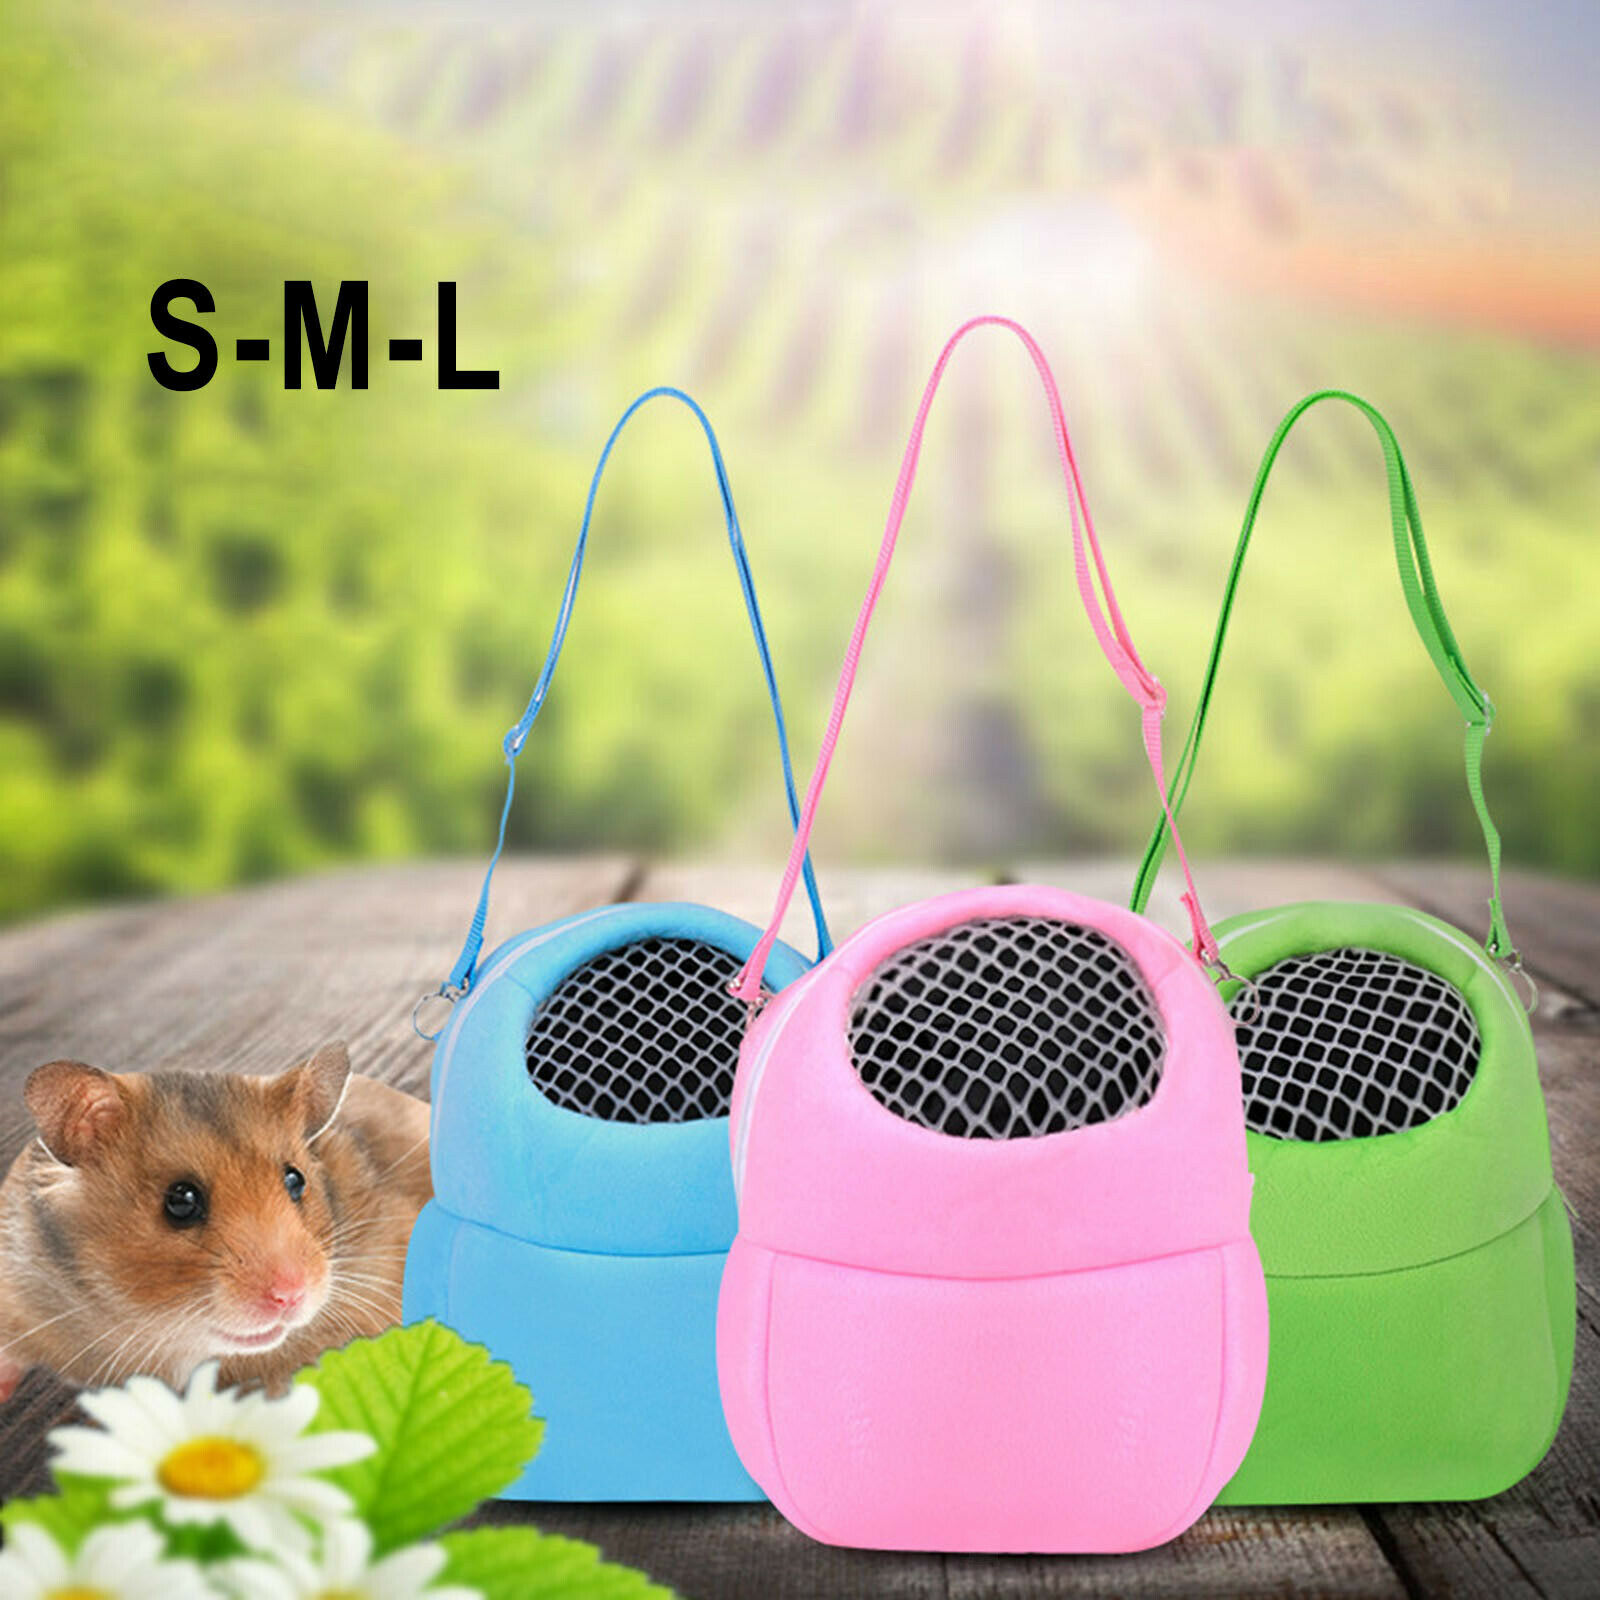 Small Animals Pet Carry Carrier Tote Cage Bags Portable Travel Handbags Warm